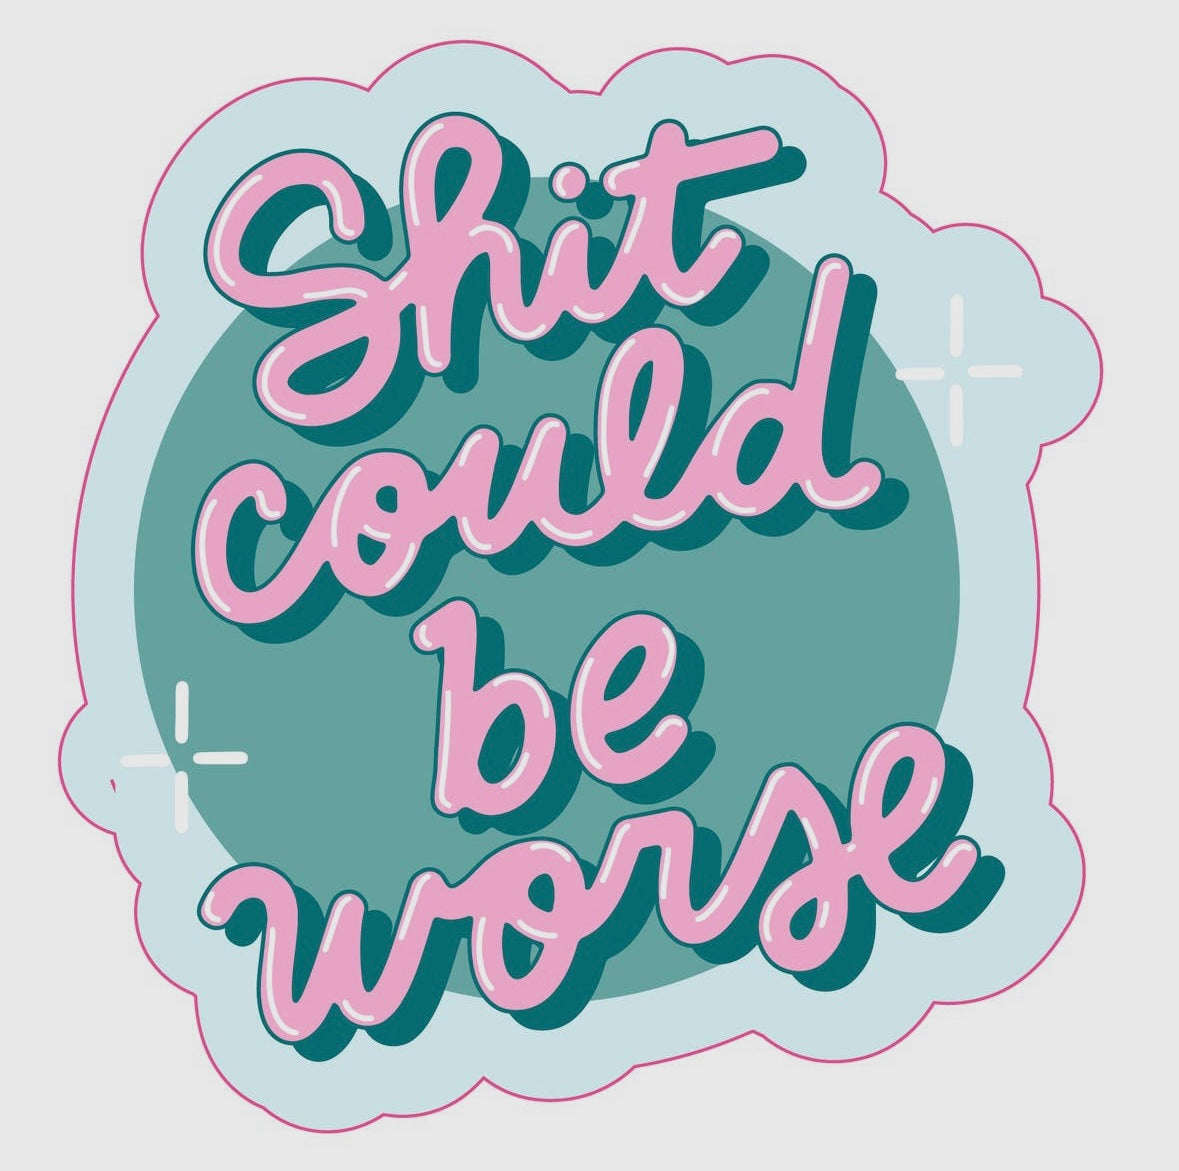 Shit could be worse vinyl sticker